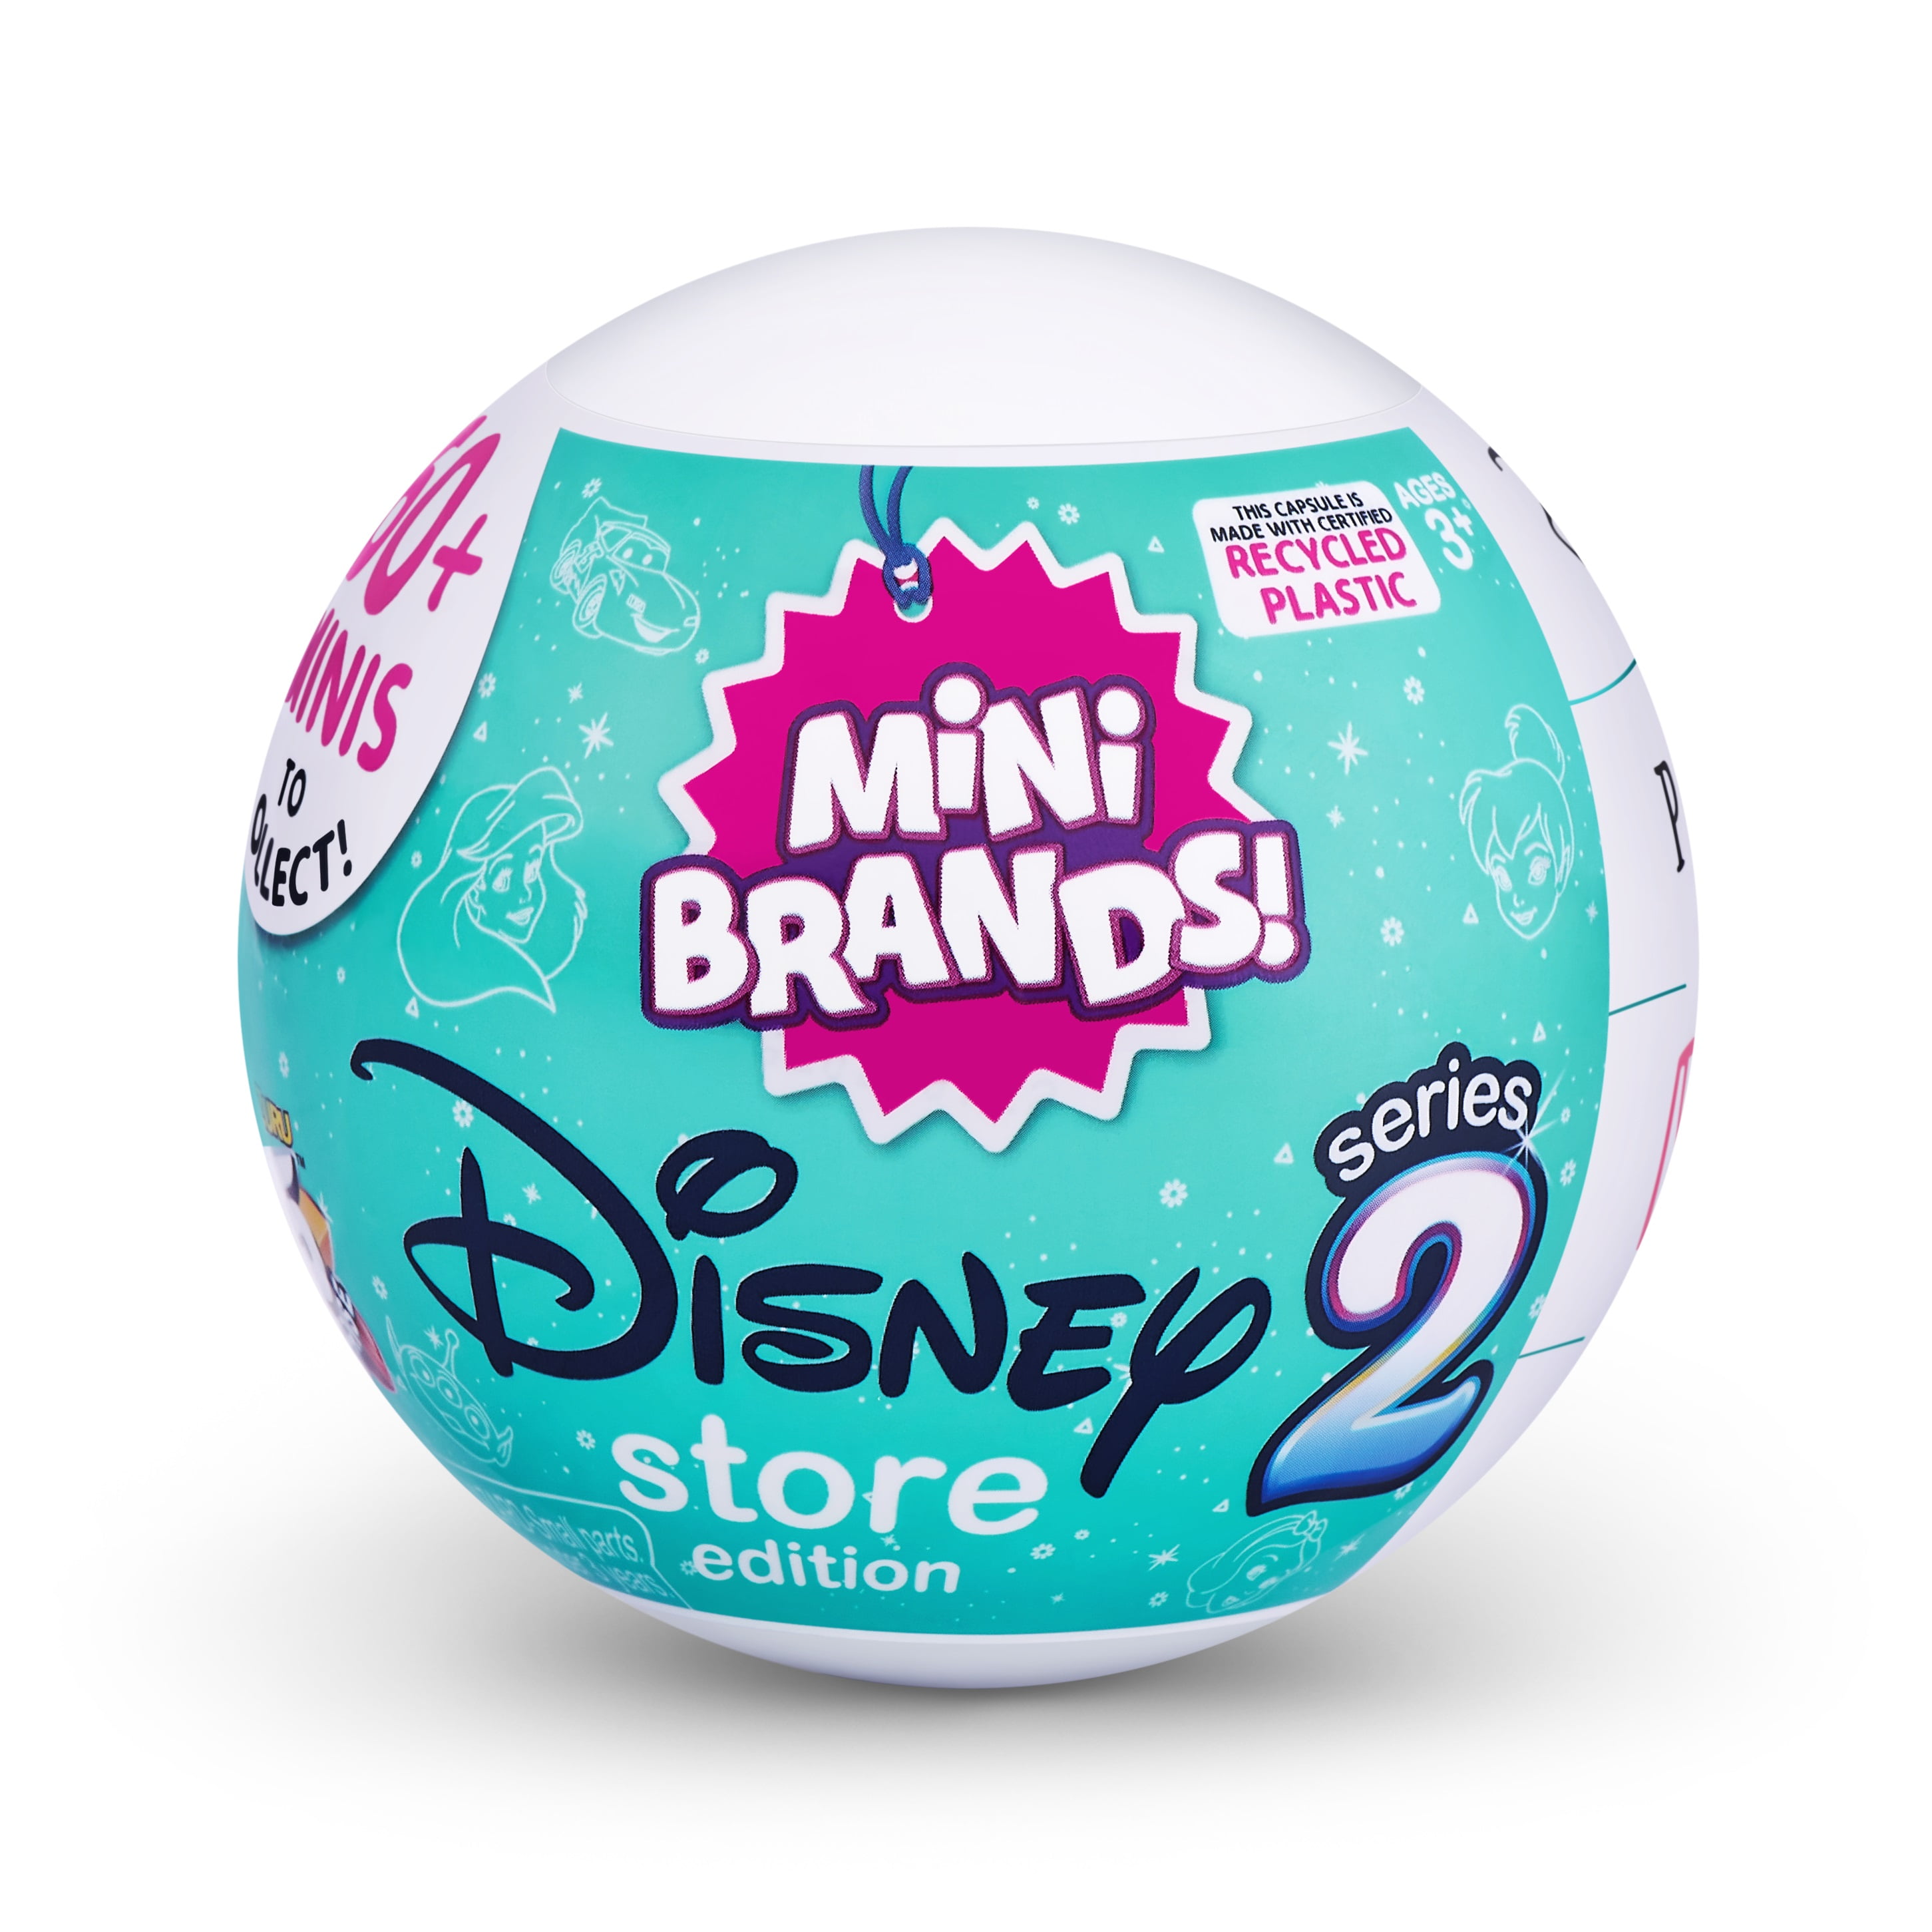 5 Surprise Mini Brands Disney Store Series 2 Capsule Novelty and Gag Toy by ZURU